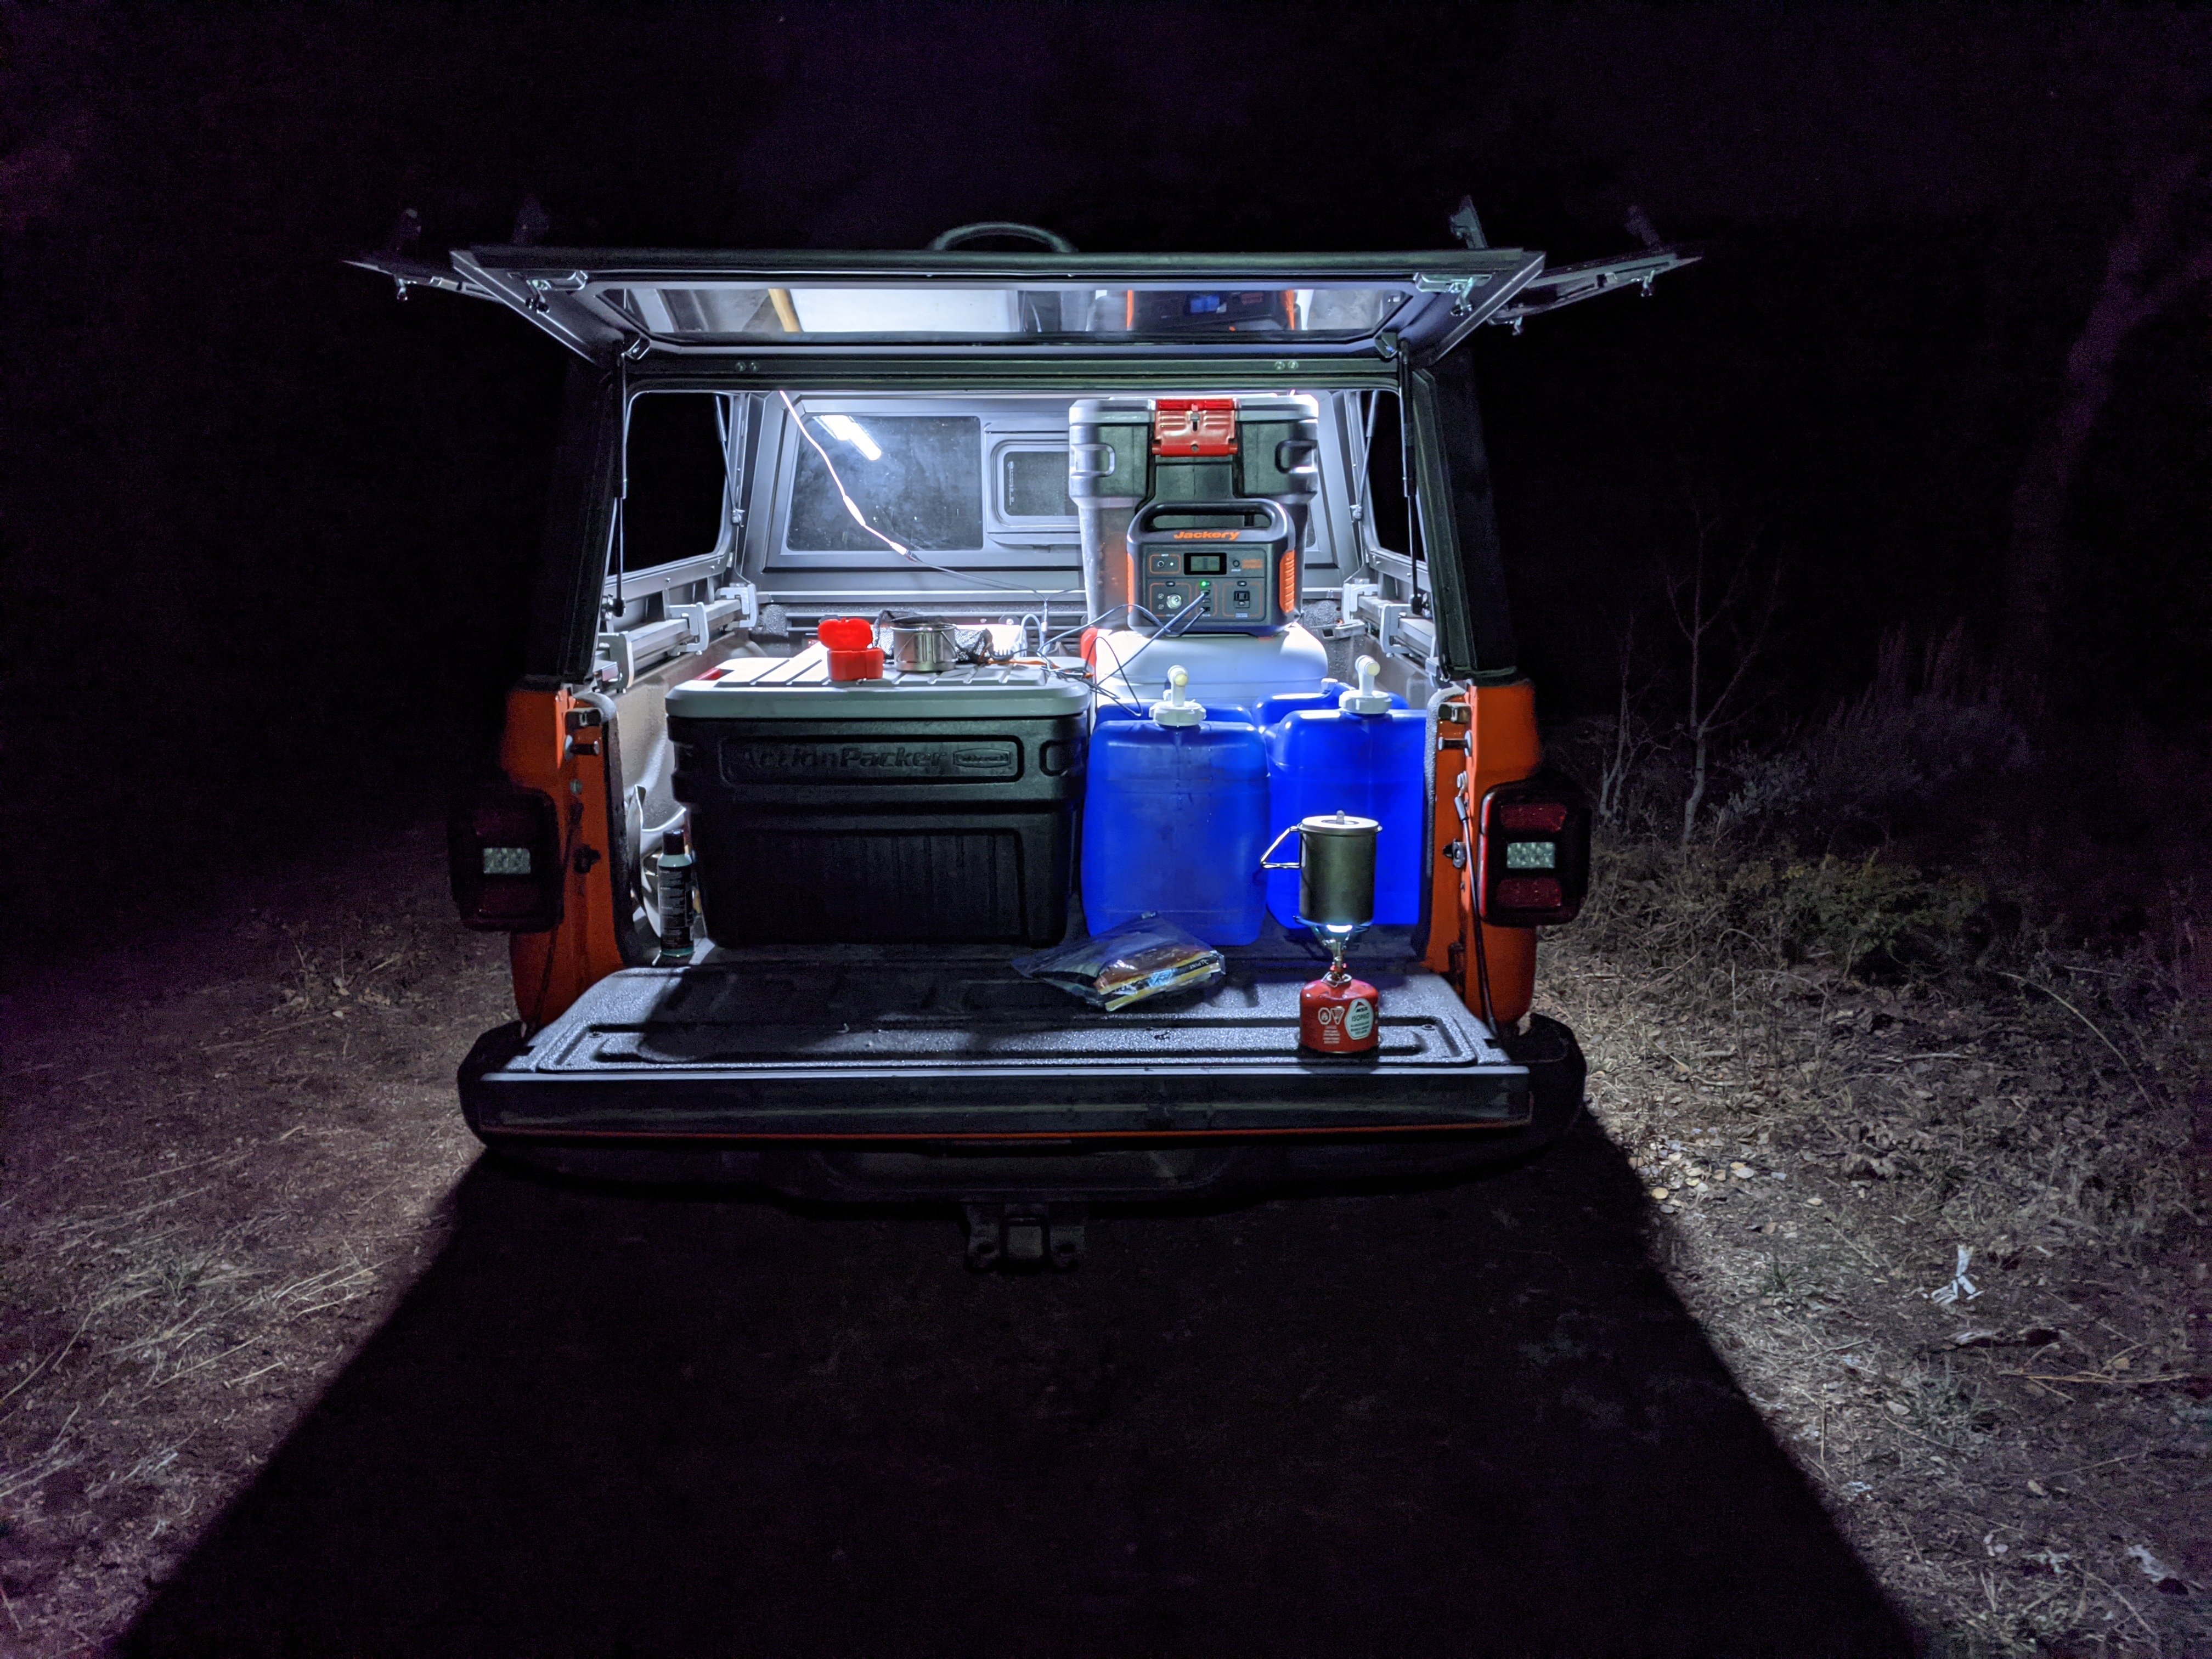 The Jackery 500 front and center in my early morning setup. Cooking breakfast, running lights, and charging gear at 4:23am on the tailgate before heading out for the day.